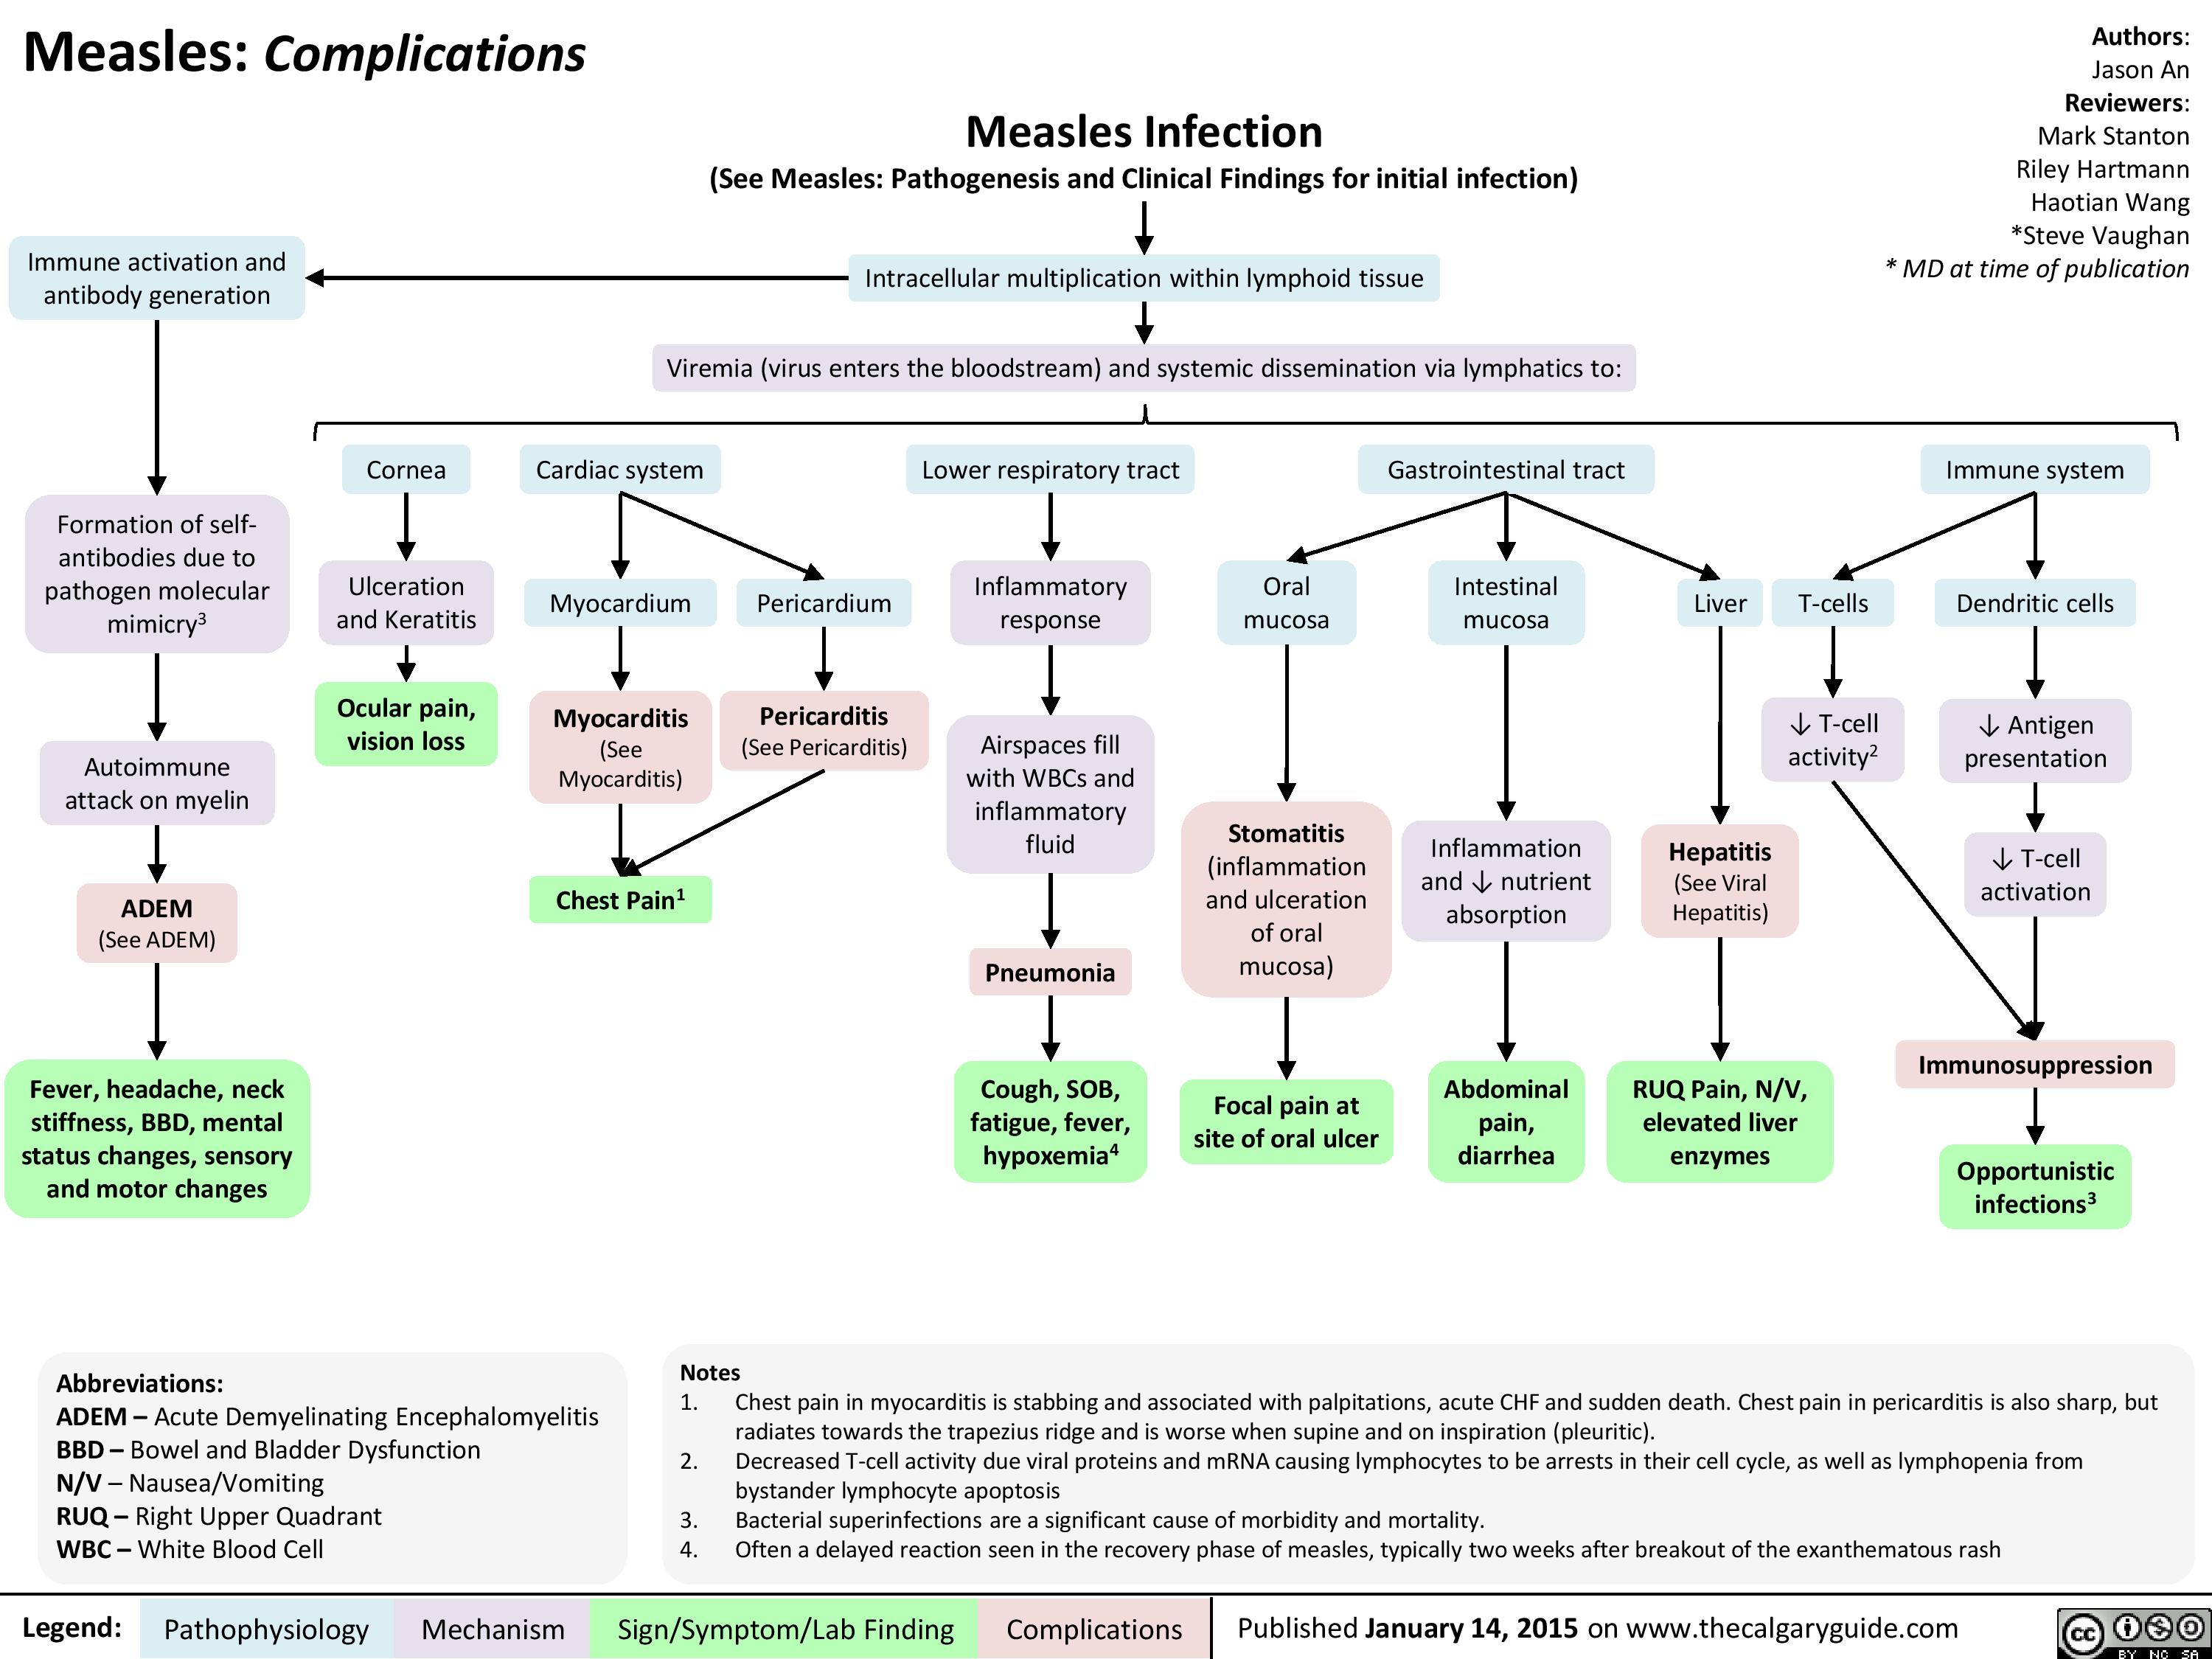 Complications of Measles Pathogenesis and Clinical Findings